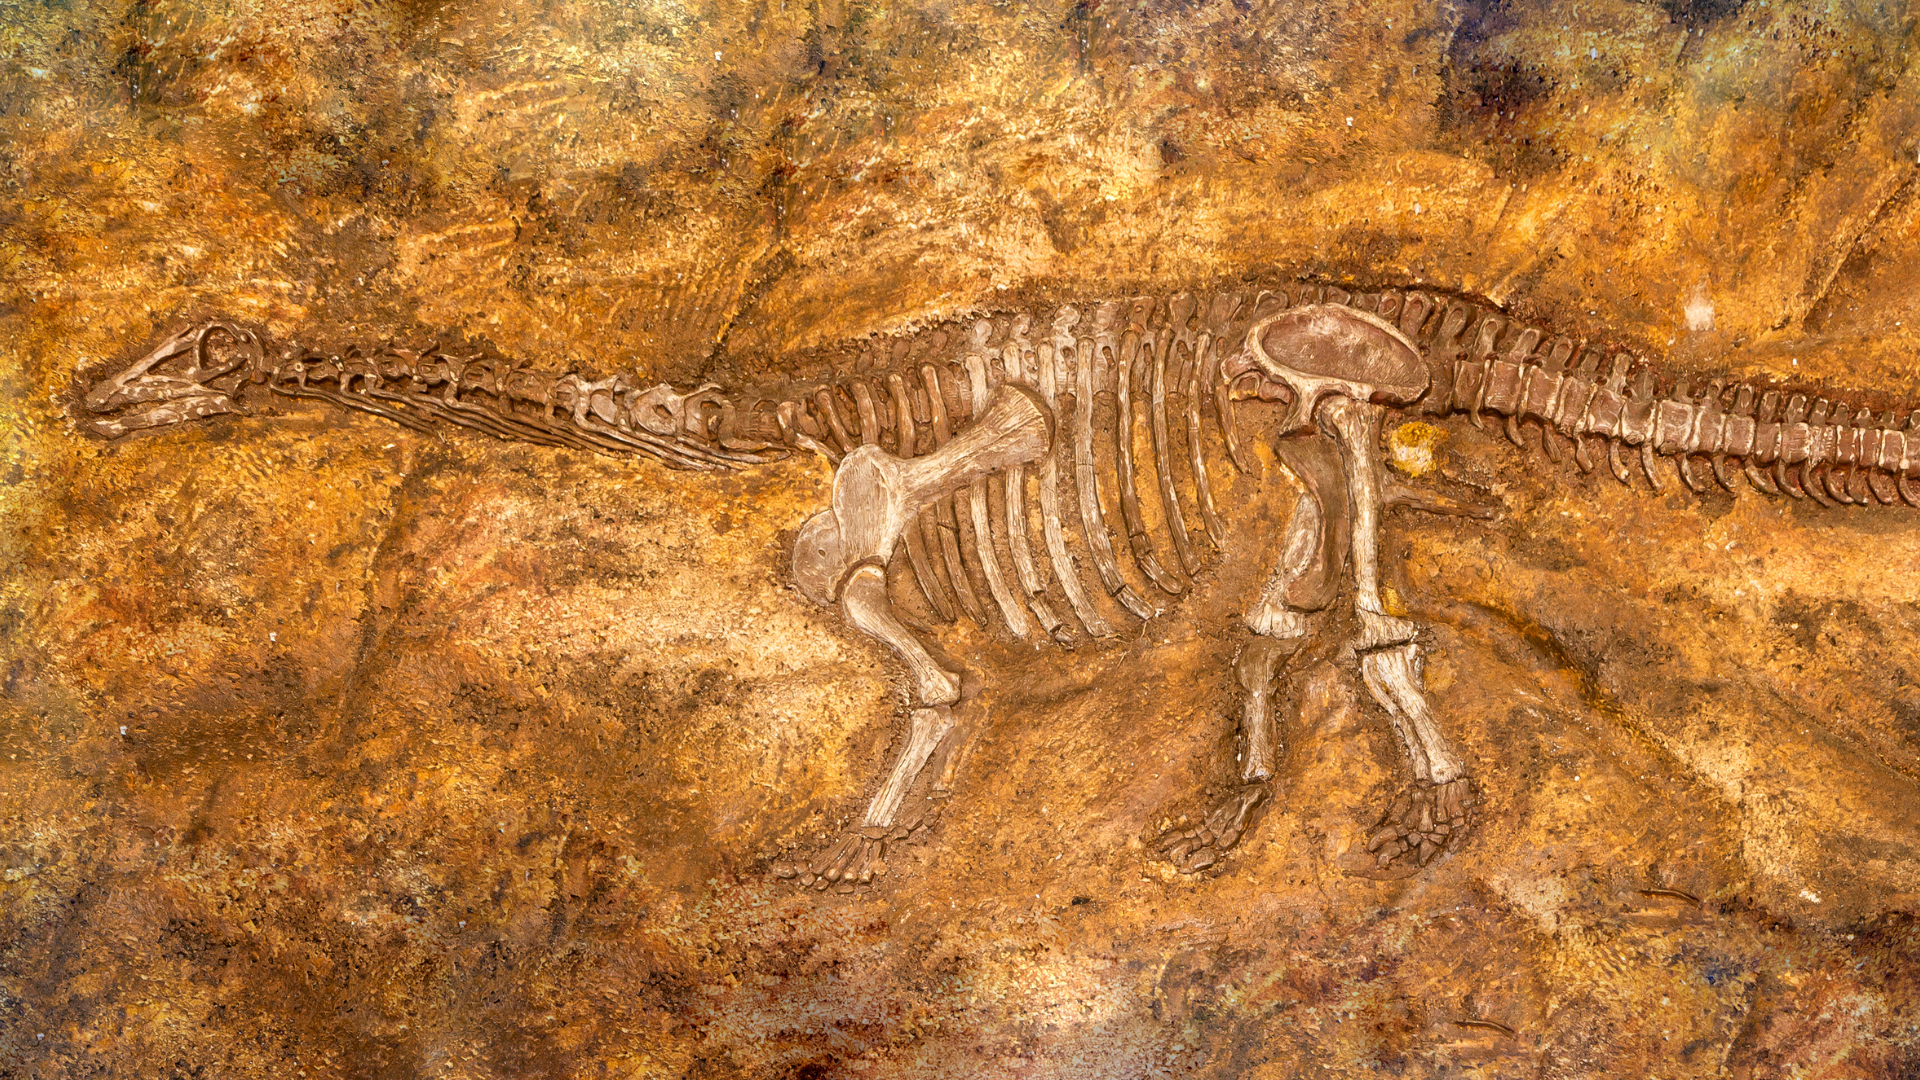 Fossil of dinosaurs